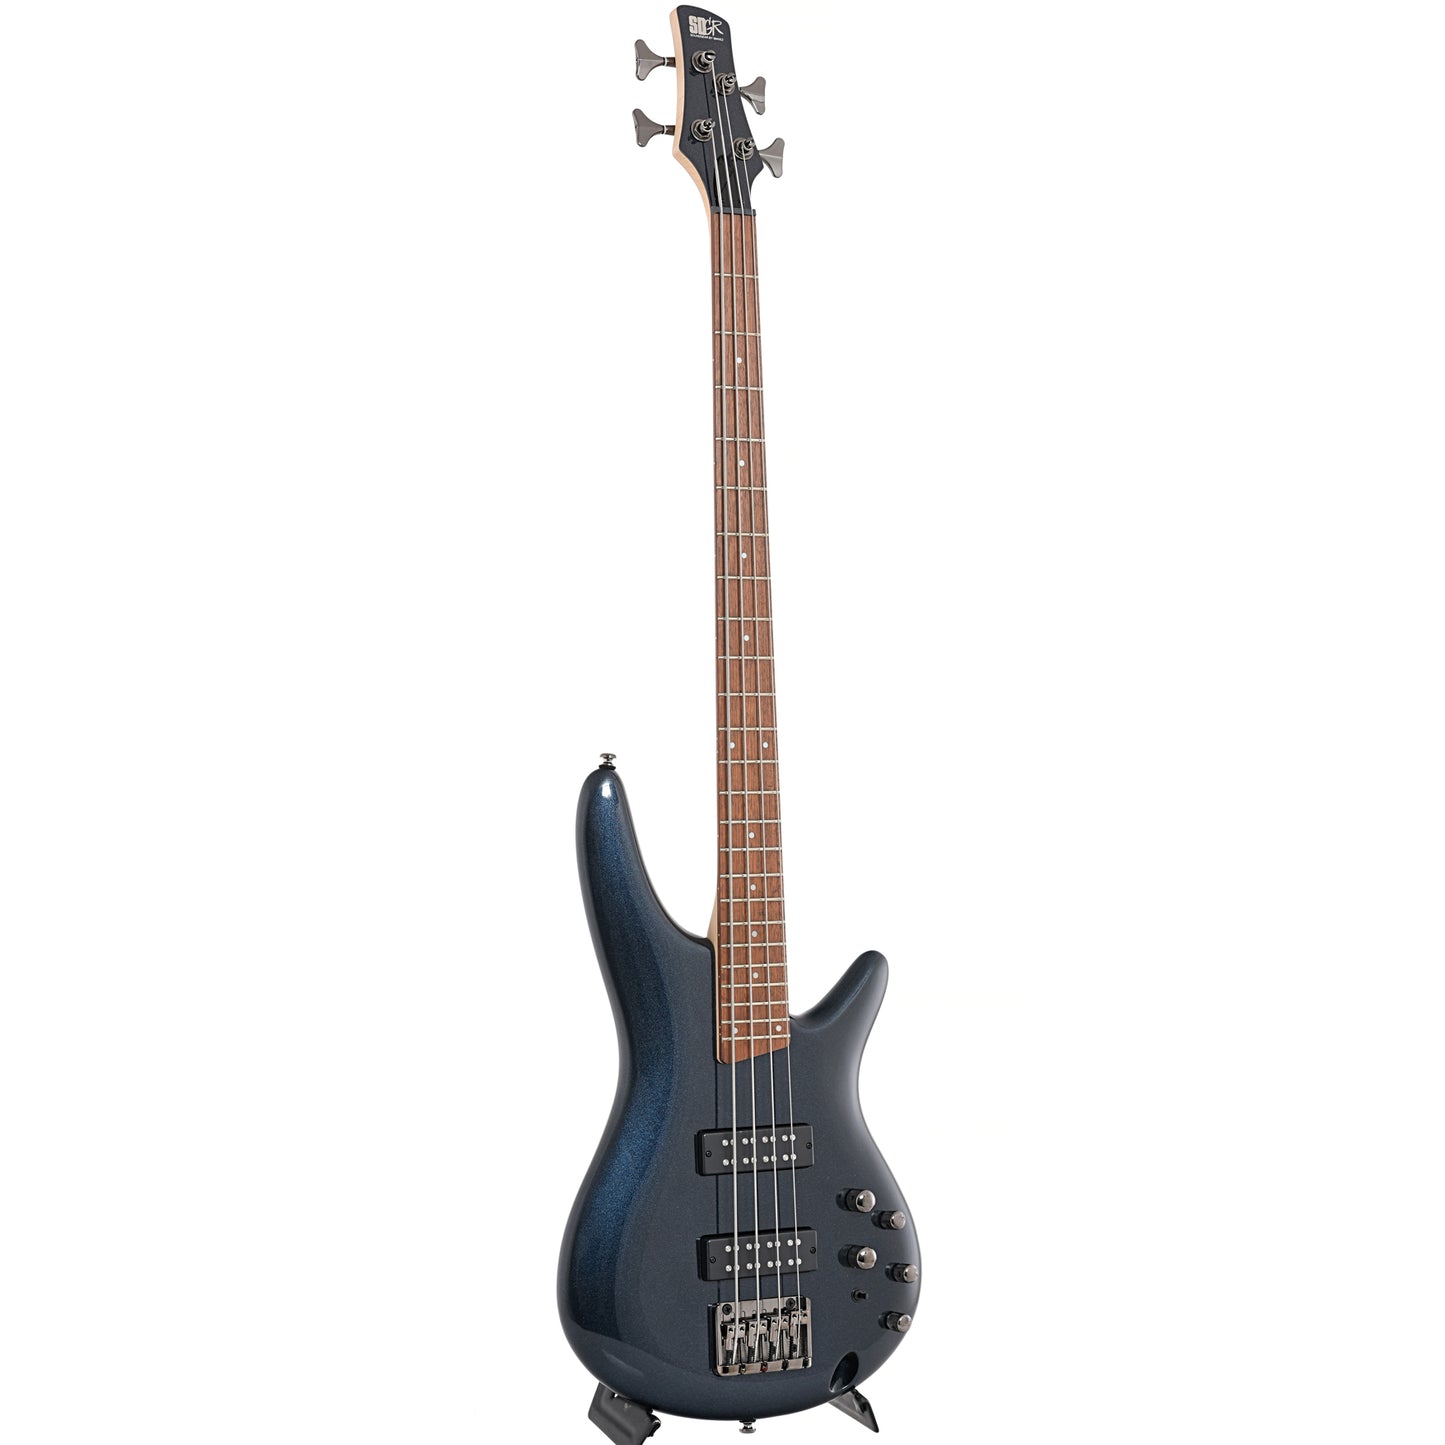 Image 11 of Ibanez SR300E 4-String Bass, Iron Pewter- SKU# SR300E-IPT : Product Type Solid Body Bass Guitars : Elderly Instruments